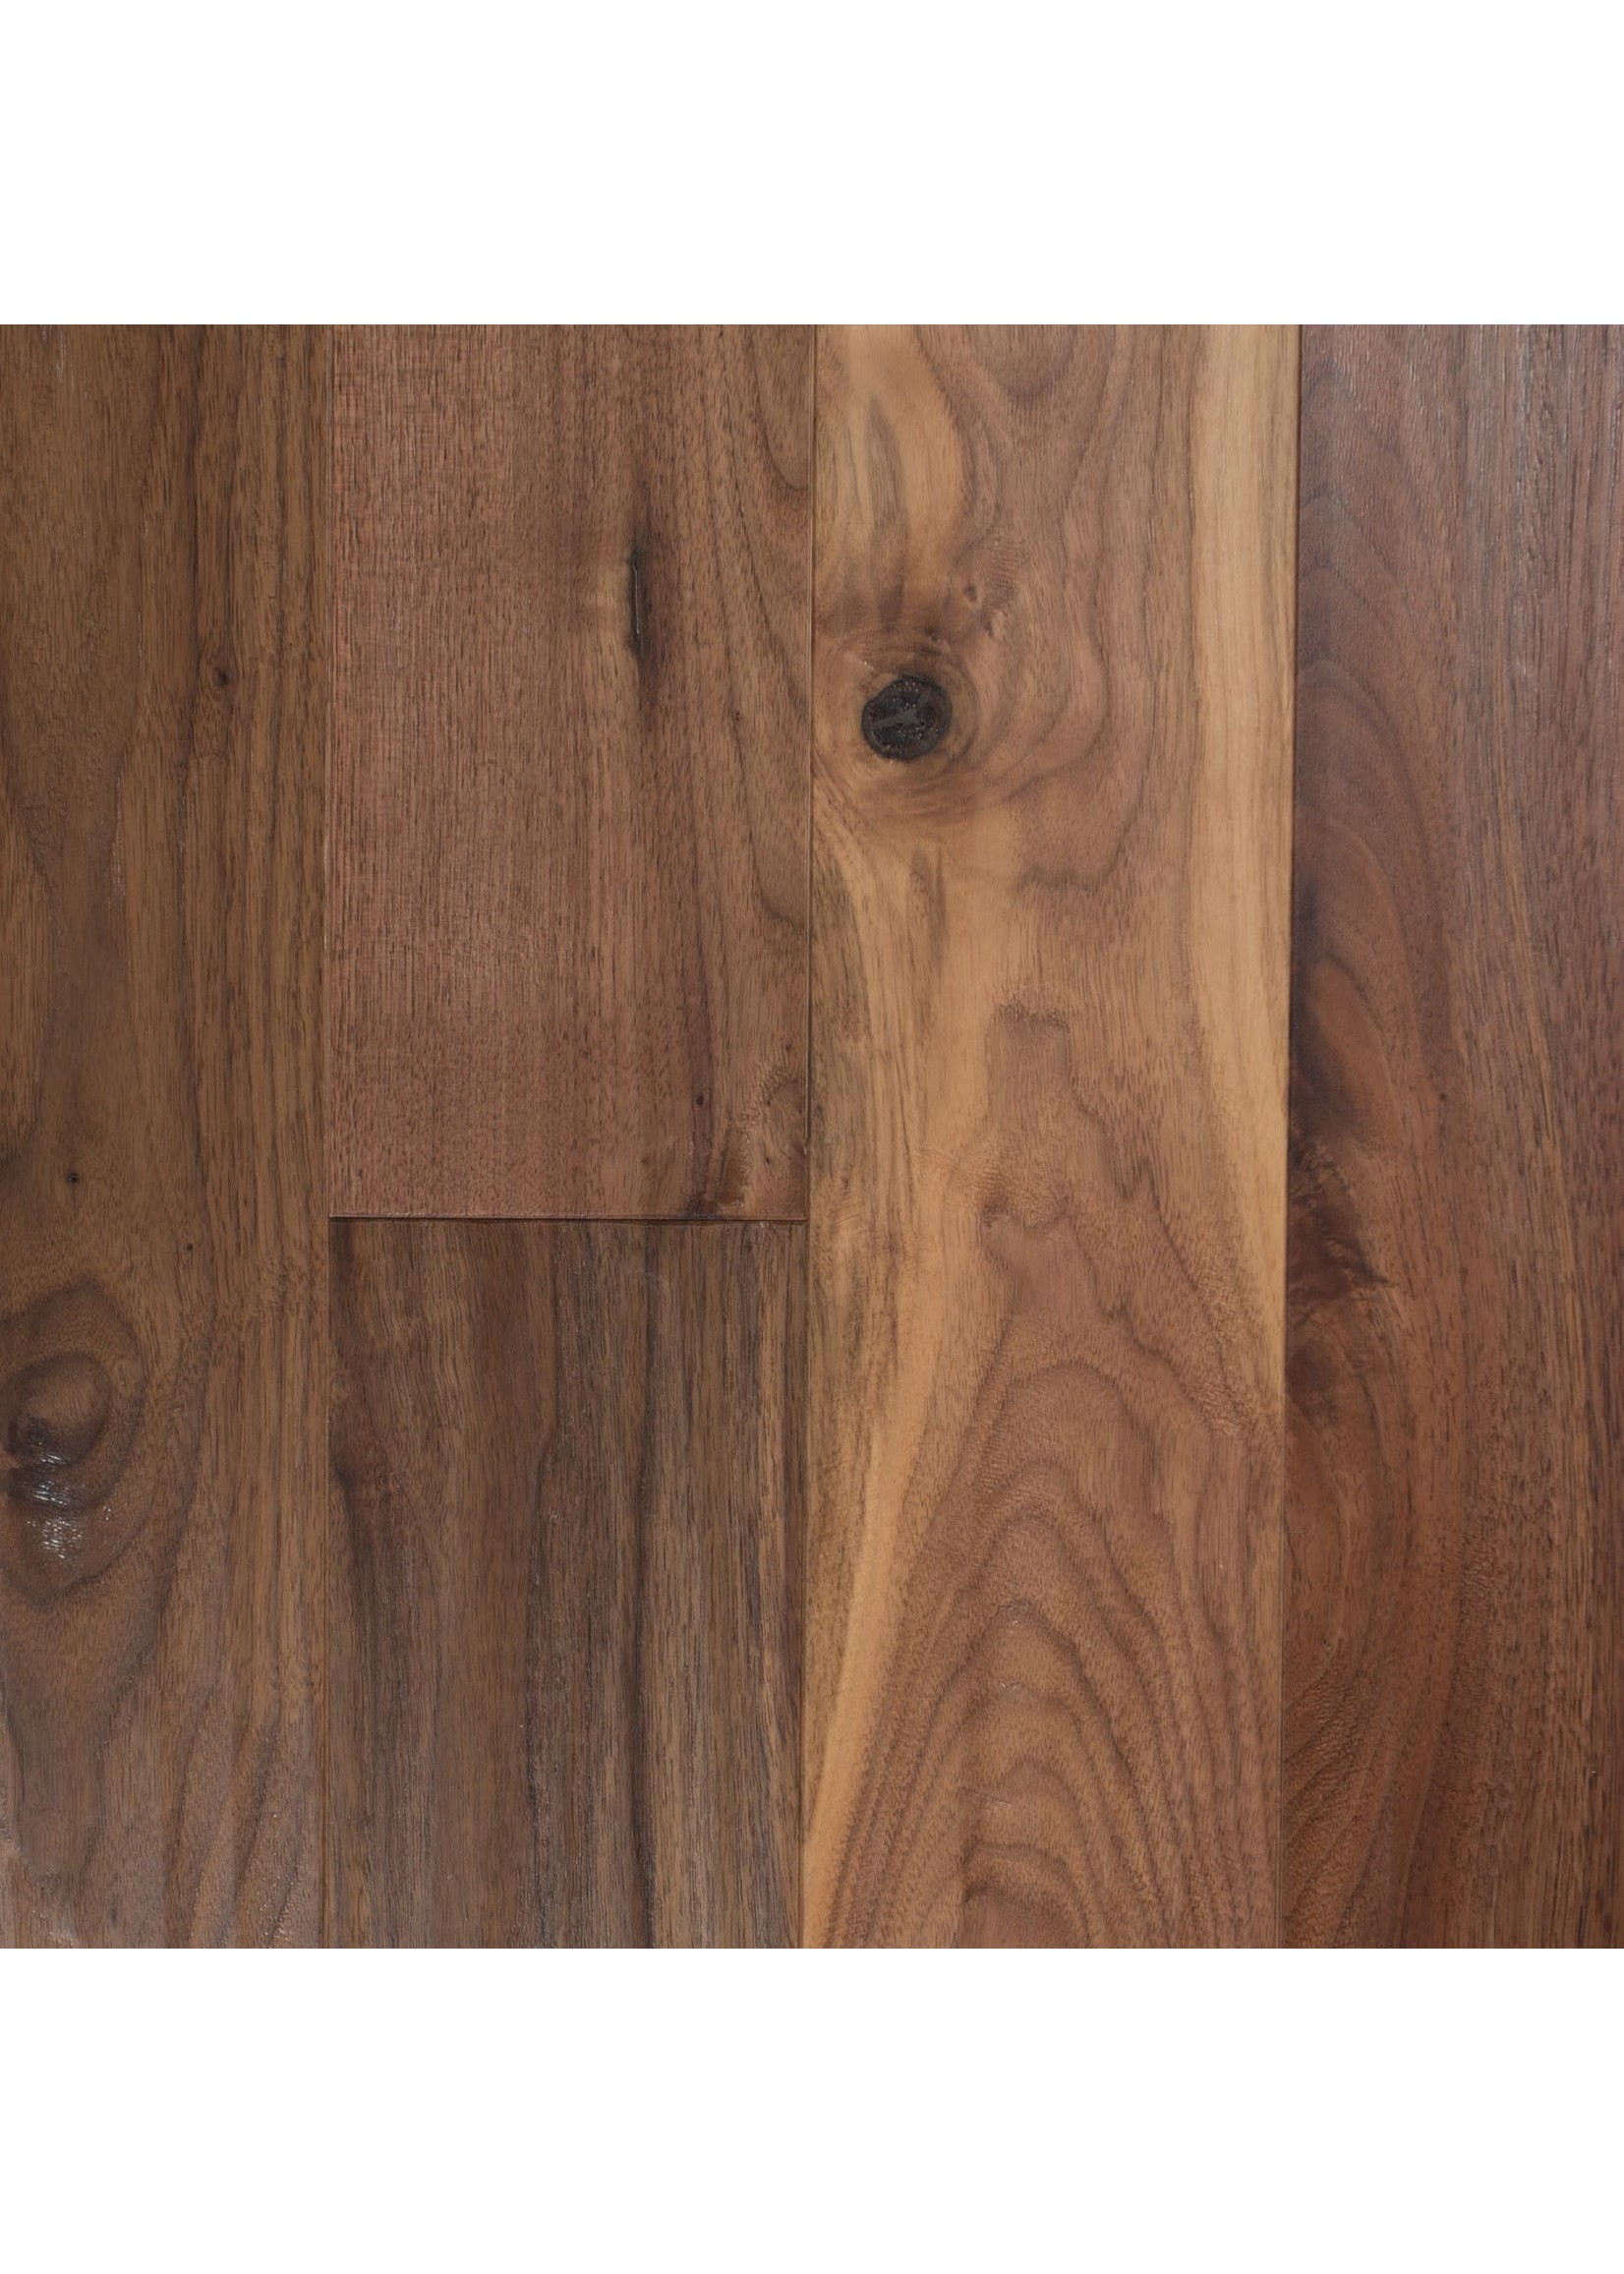 Old Wood Delaware Walnut Flooring - Price Per Sq Ft - Unfinished Material Only